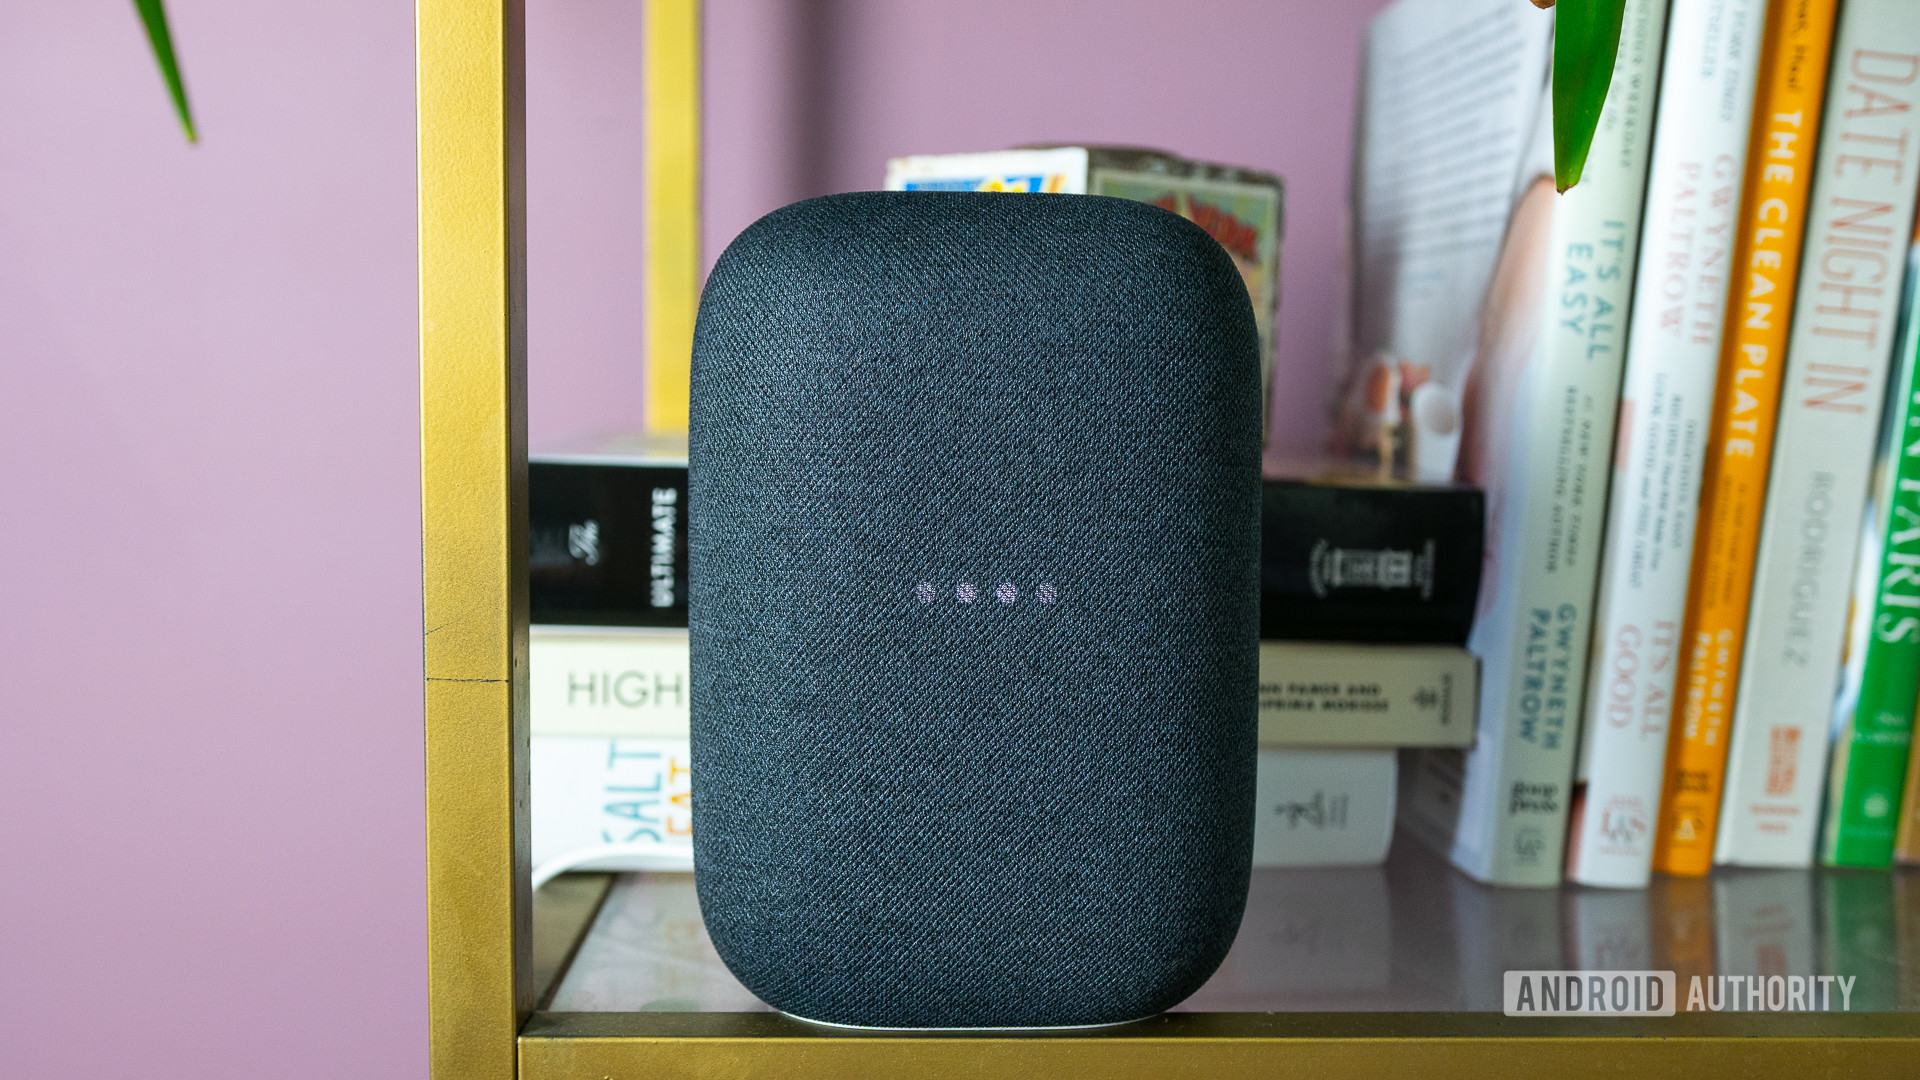 The picture shows the gray Google Nest Audio on the bookshelf, with the lights flickering.